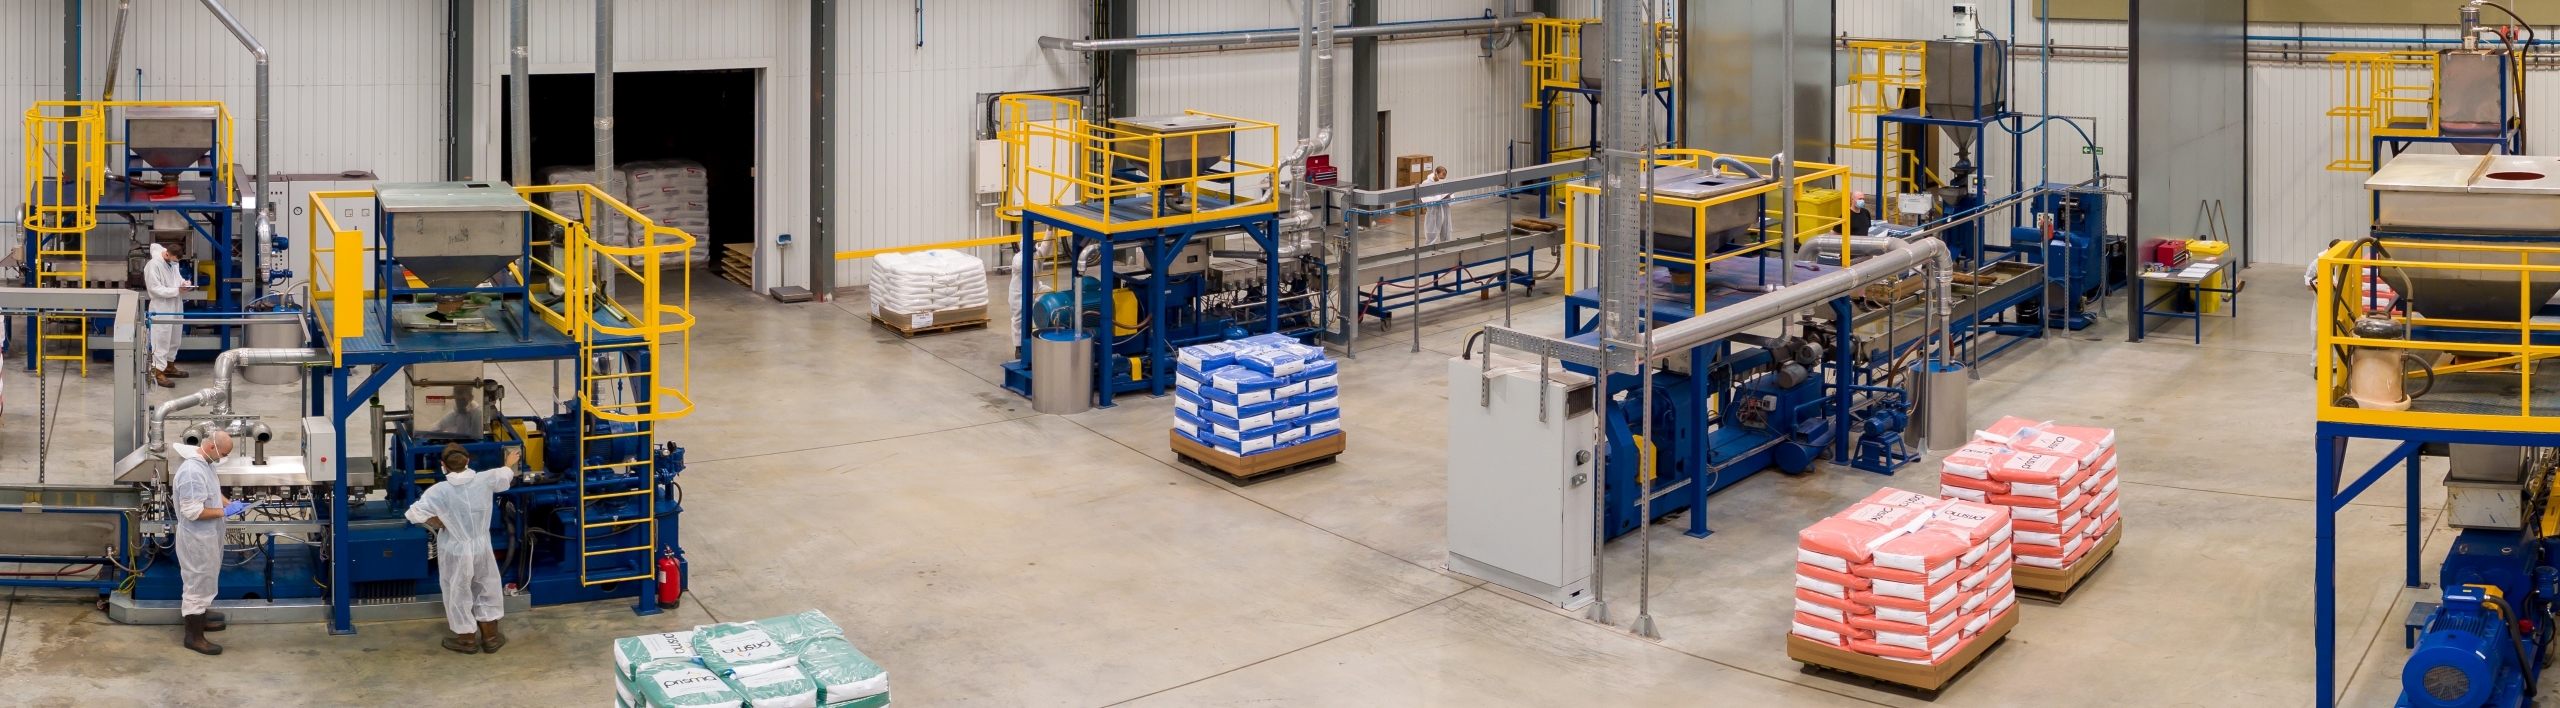 Prisma Group New Facility Expansion for Colour and Additives